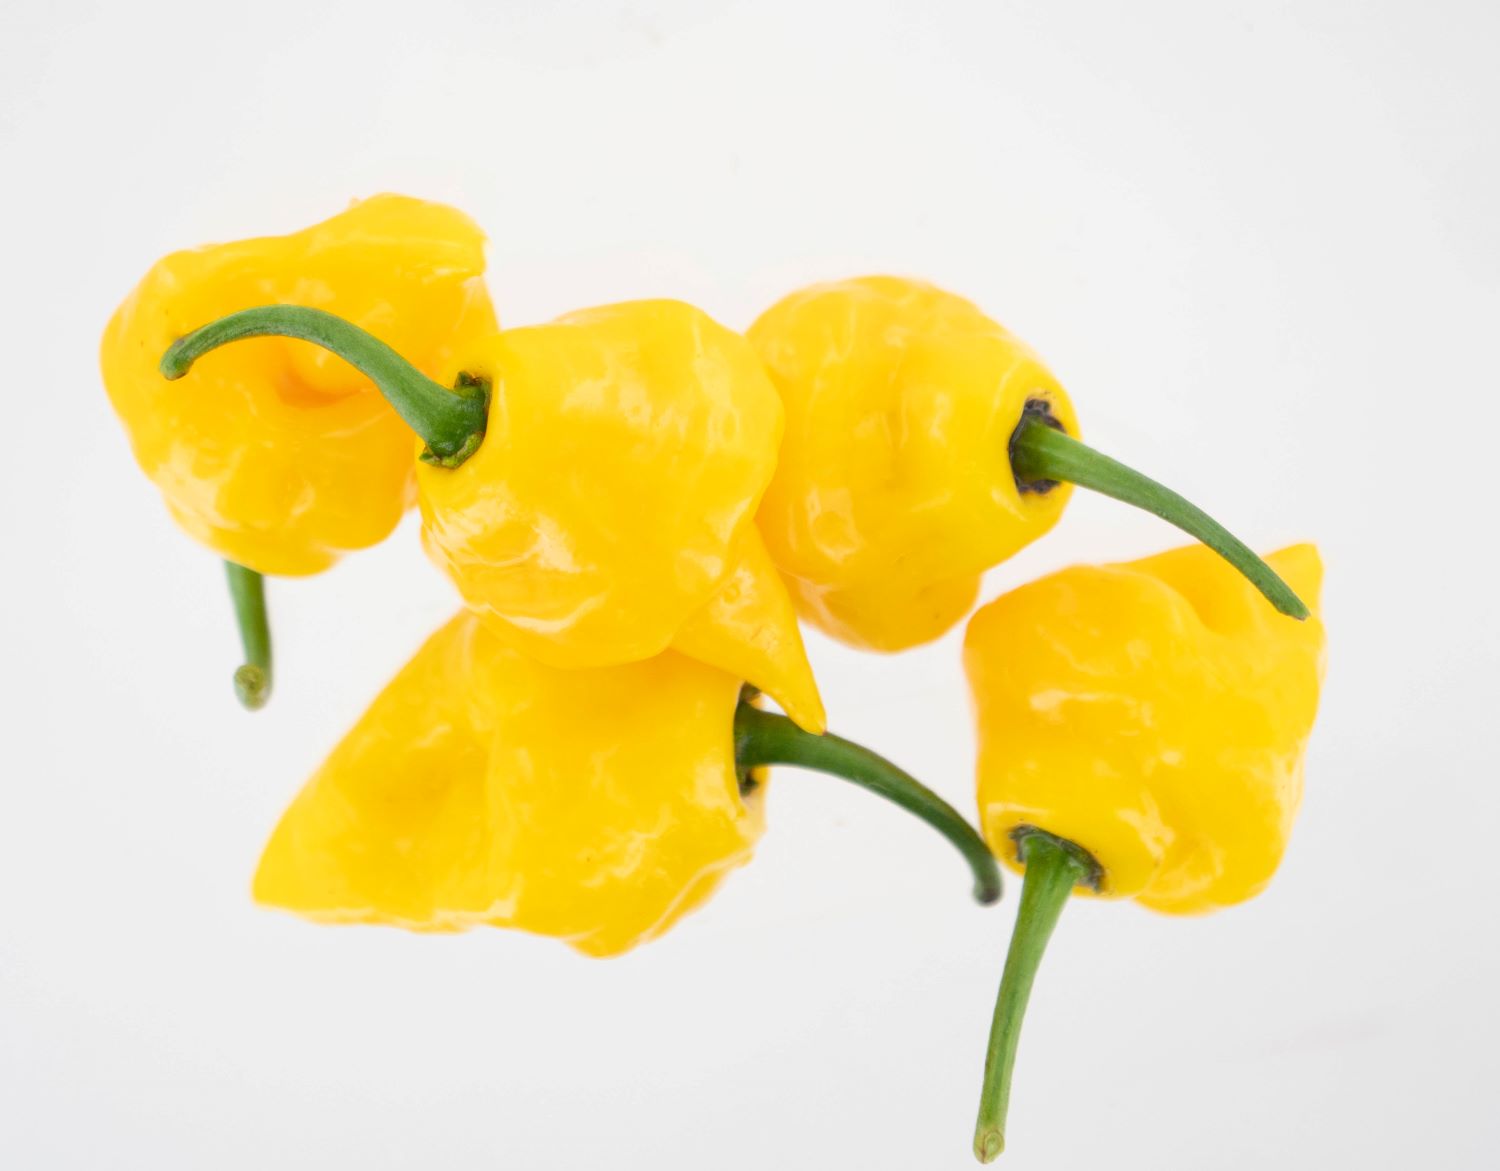 Pepper Joe's Trinidad Perfume Yellow pepper seeds - five yellow peppers piled on white background